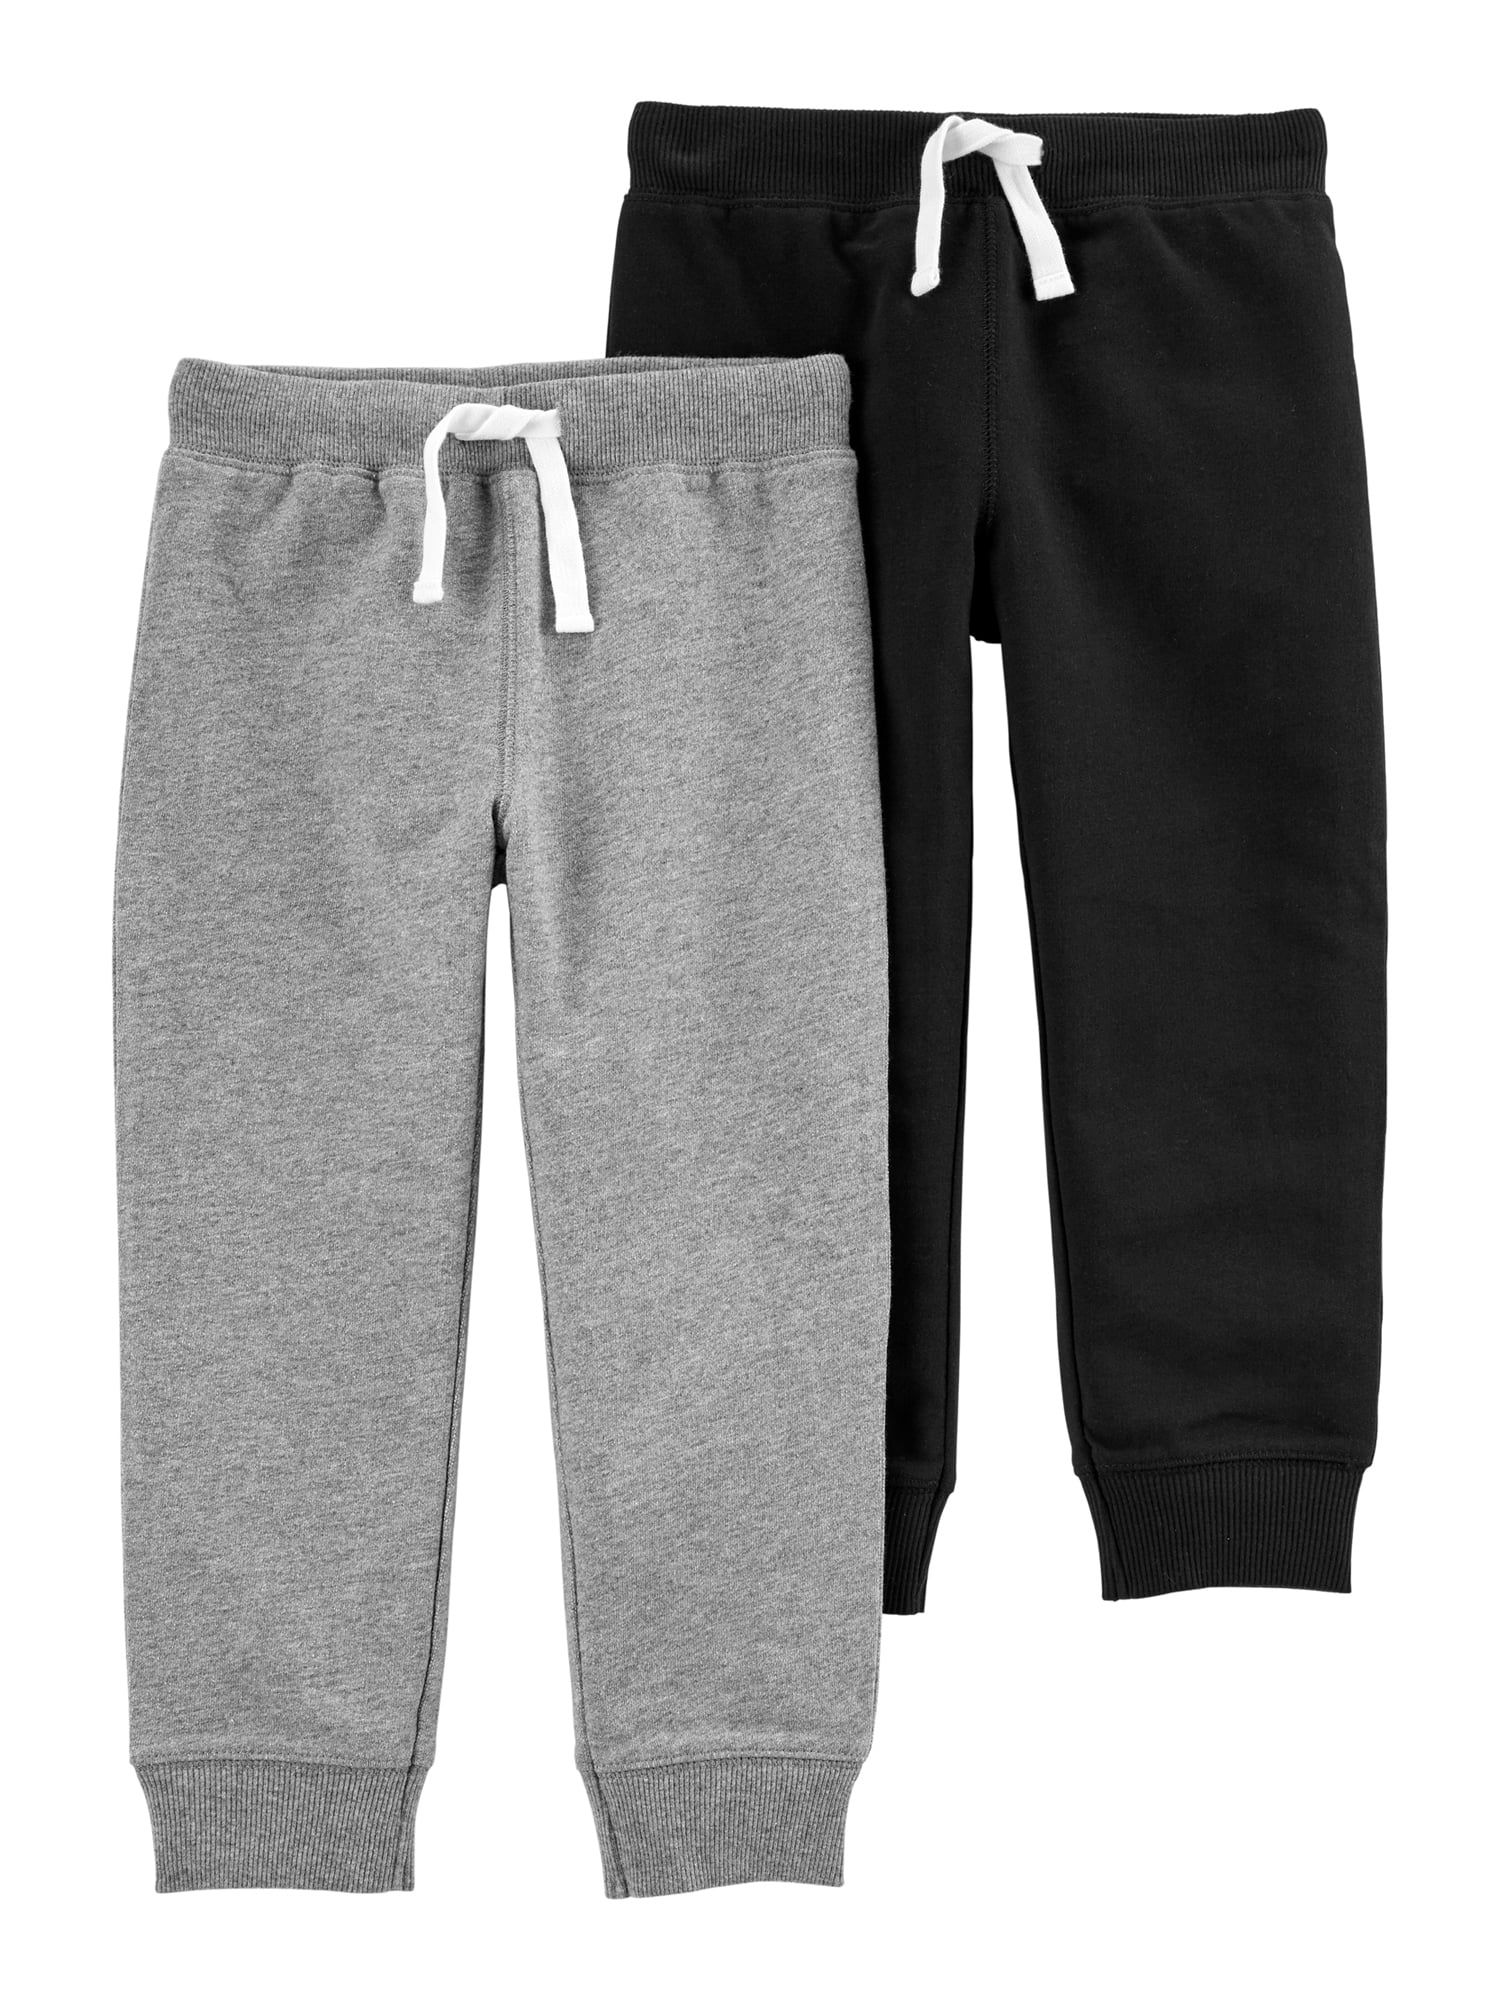 Child of Mine by Carter's Baby and Toddler Boy French Terry Jogger Sweatpants Multipack, 2-Pack, ... | Walmart (US)